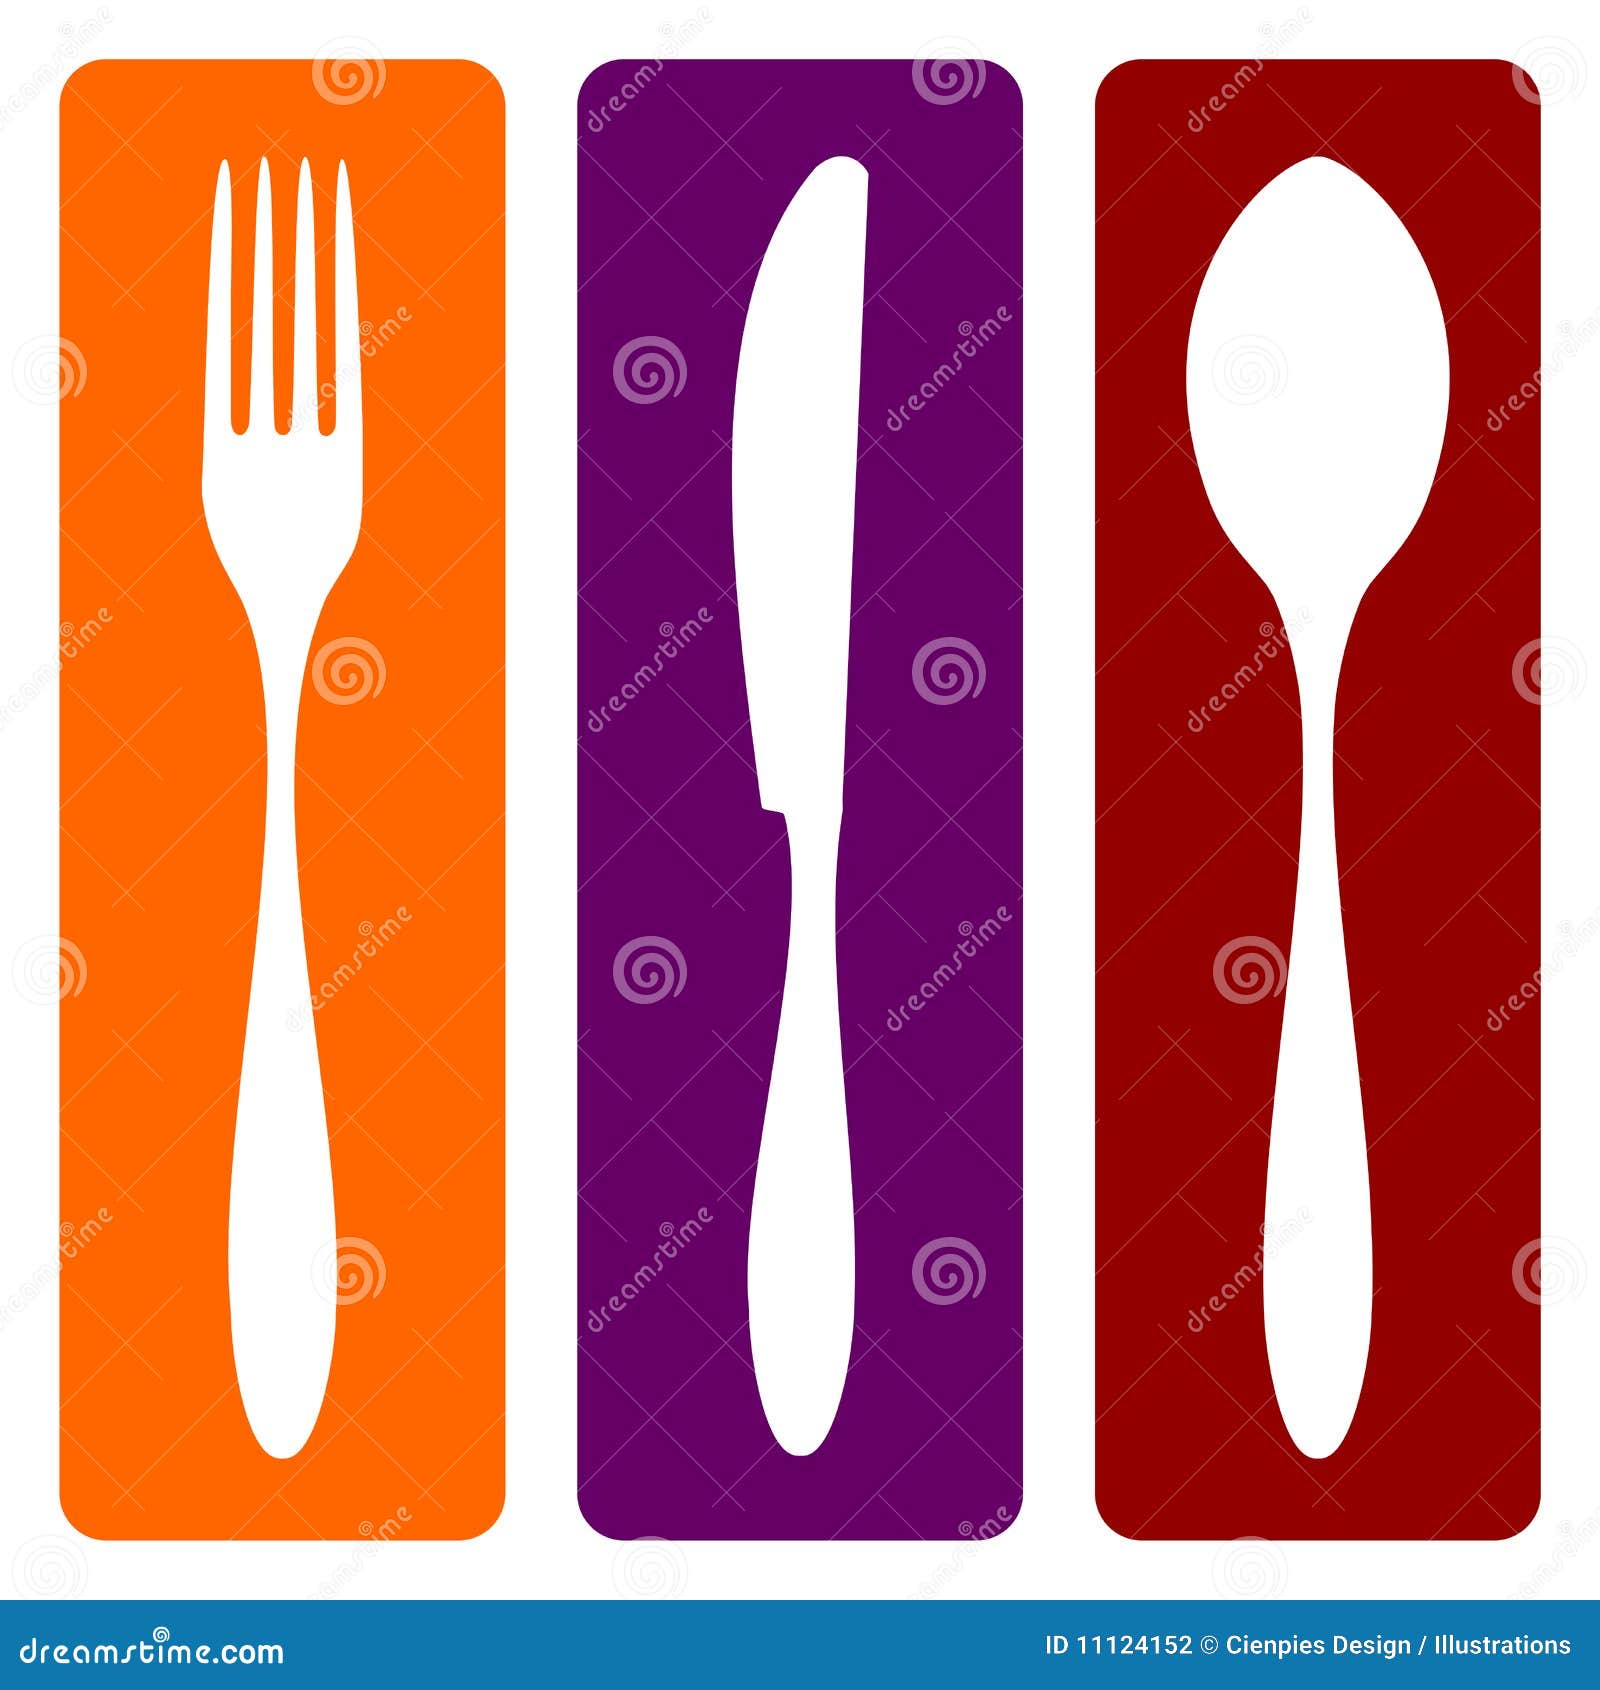 fork, knife and spoon